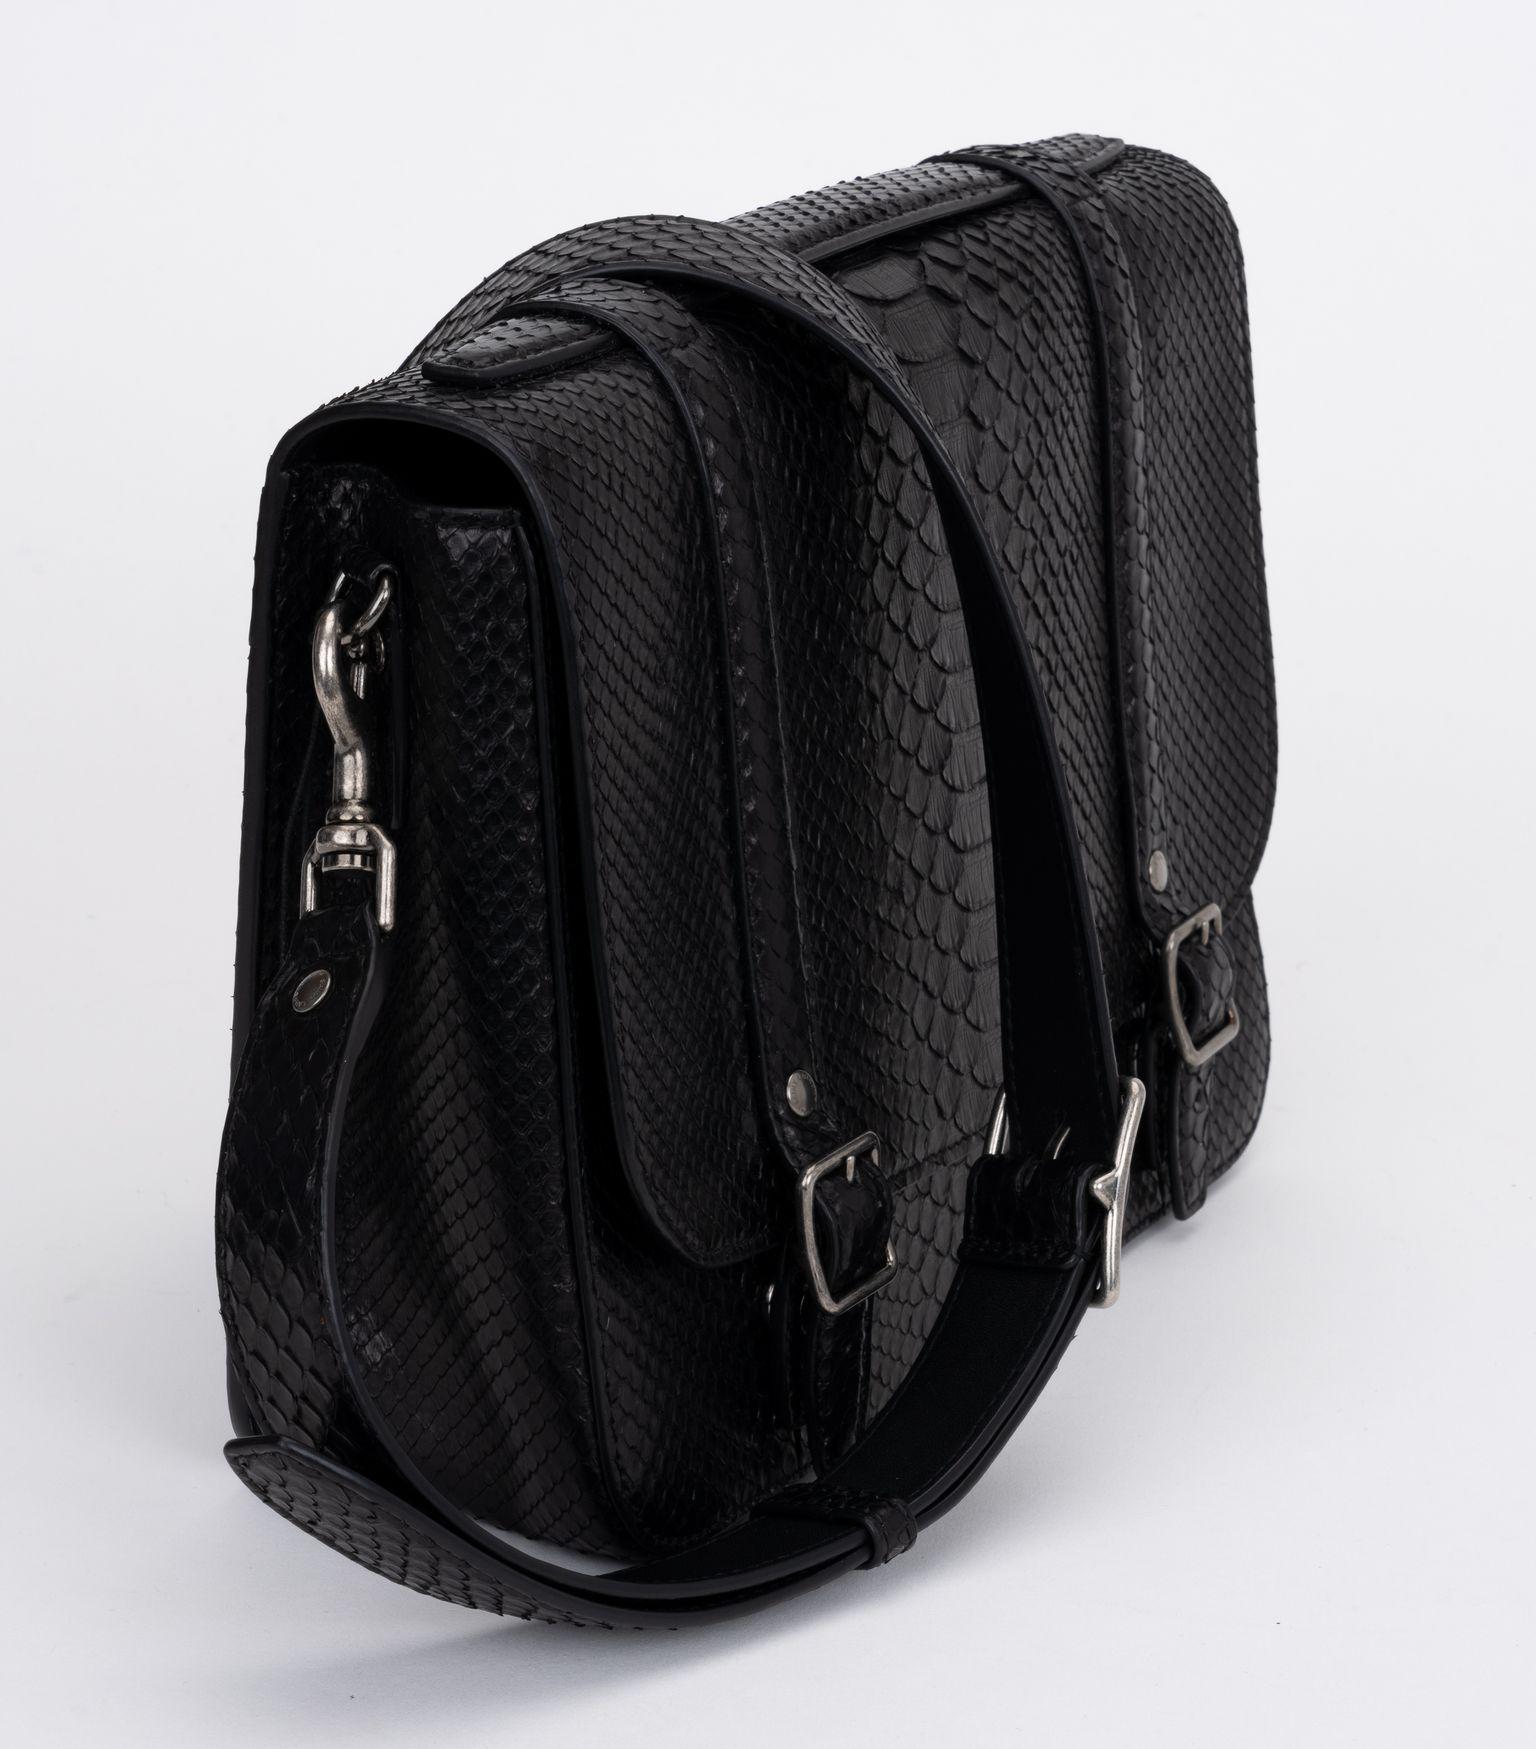 YSL new black brushed python schoolbag. Top handle, buckle fastenings, an  internal zipped pocket, a front embossed stamp, a back zip pocket and a detachable shoulder strap. Comes with original dust cover. 
Store price $3150.